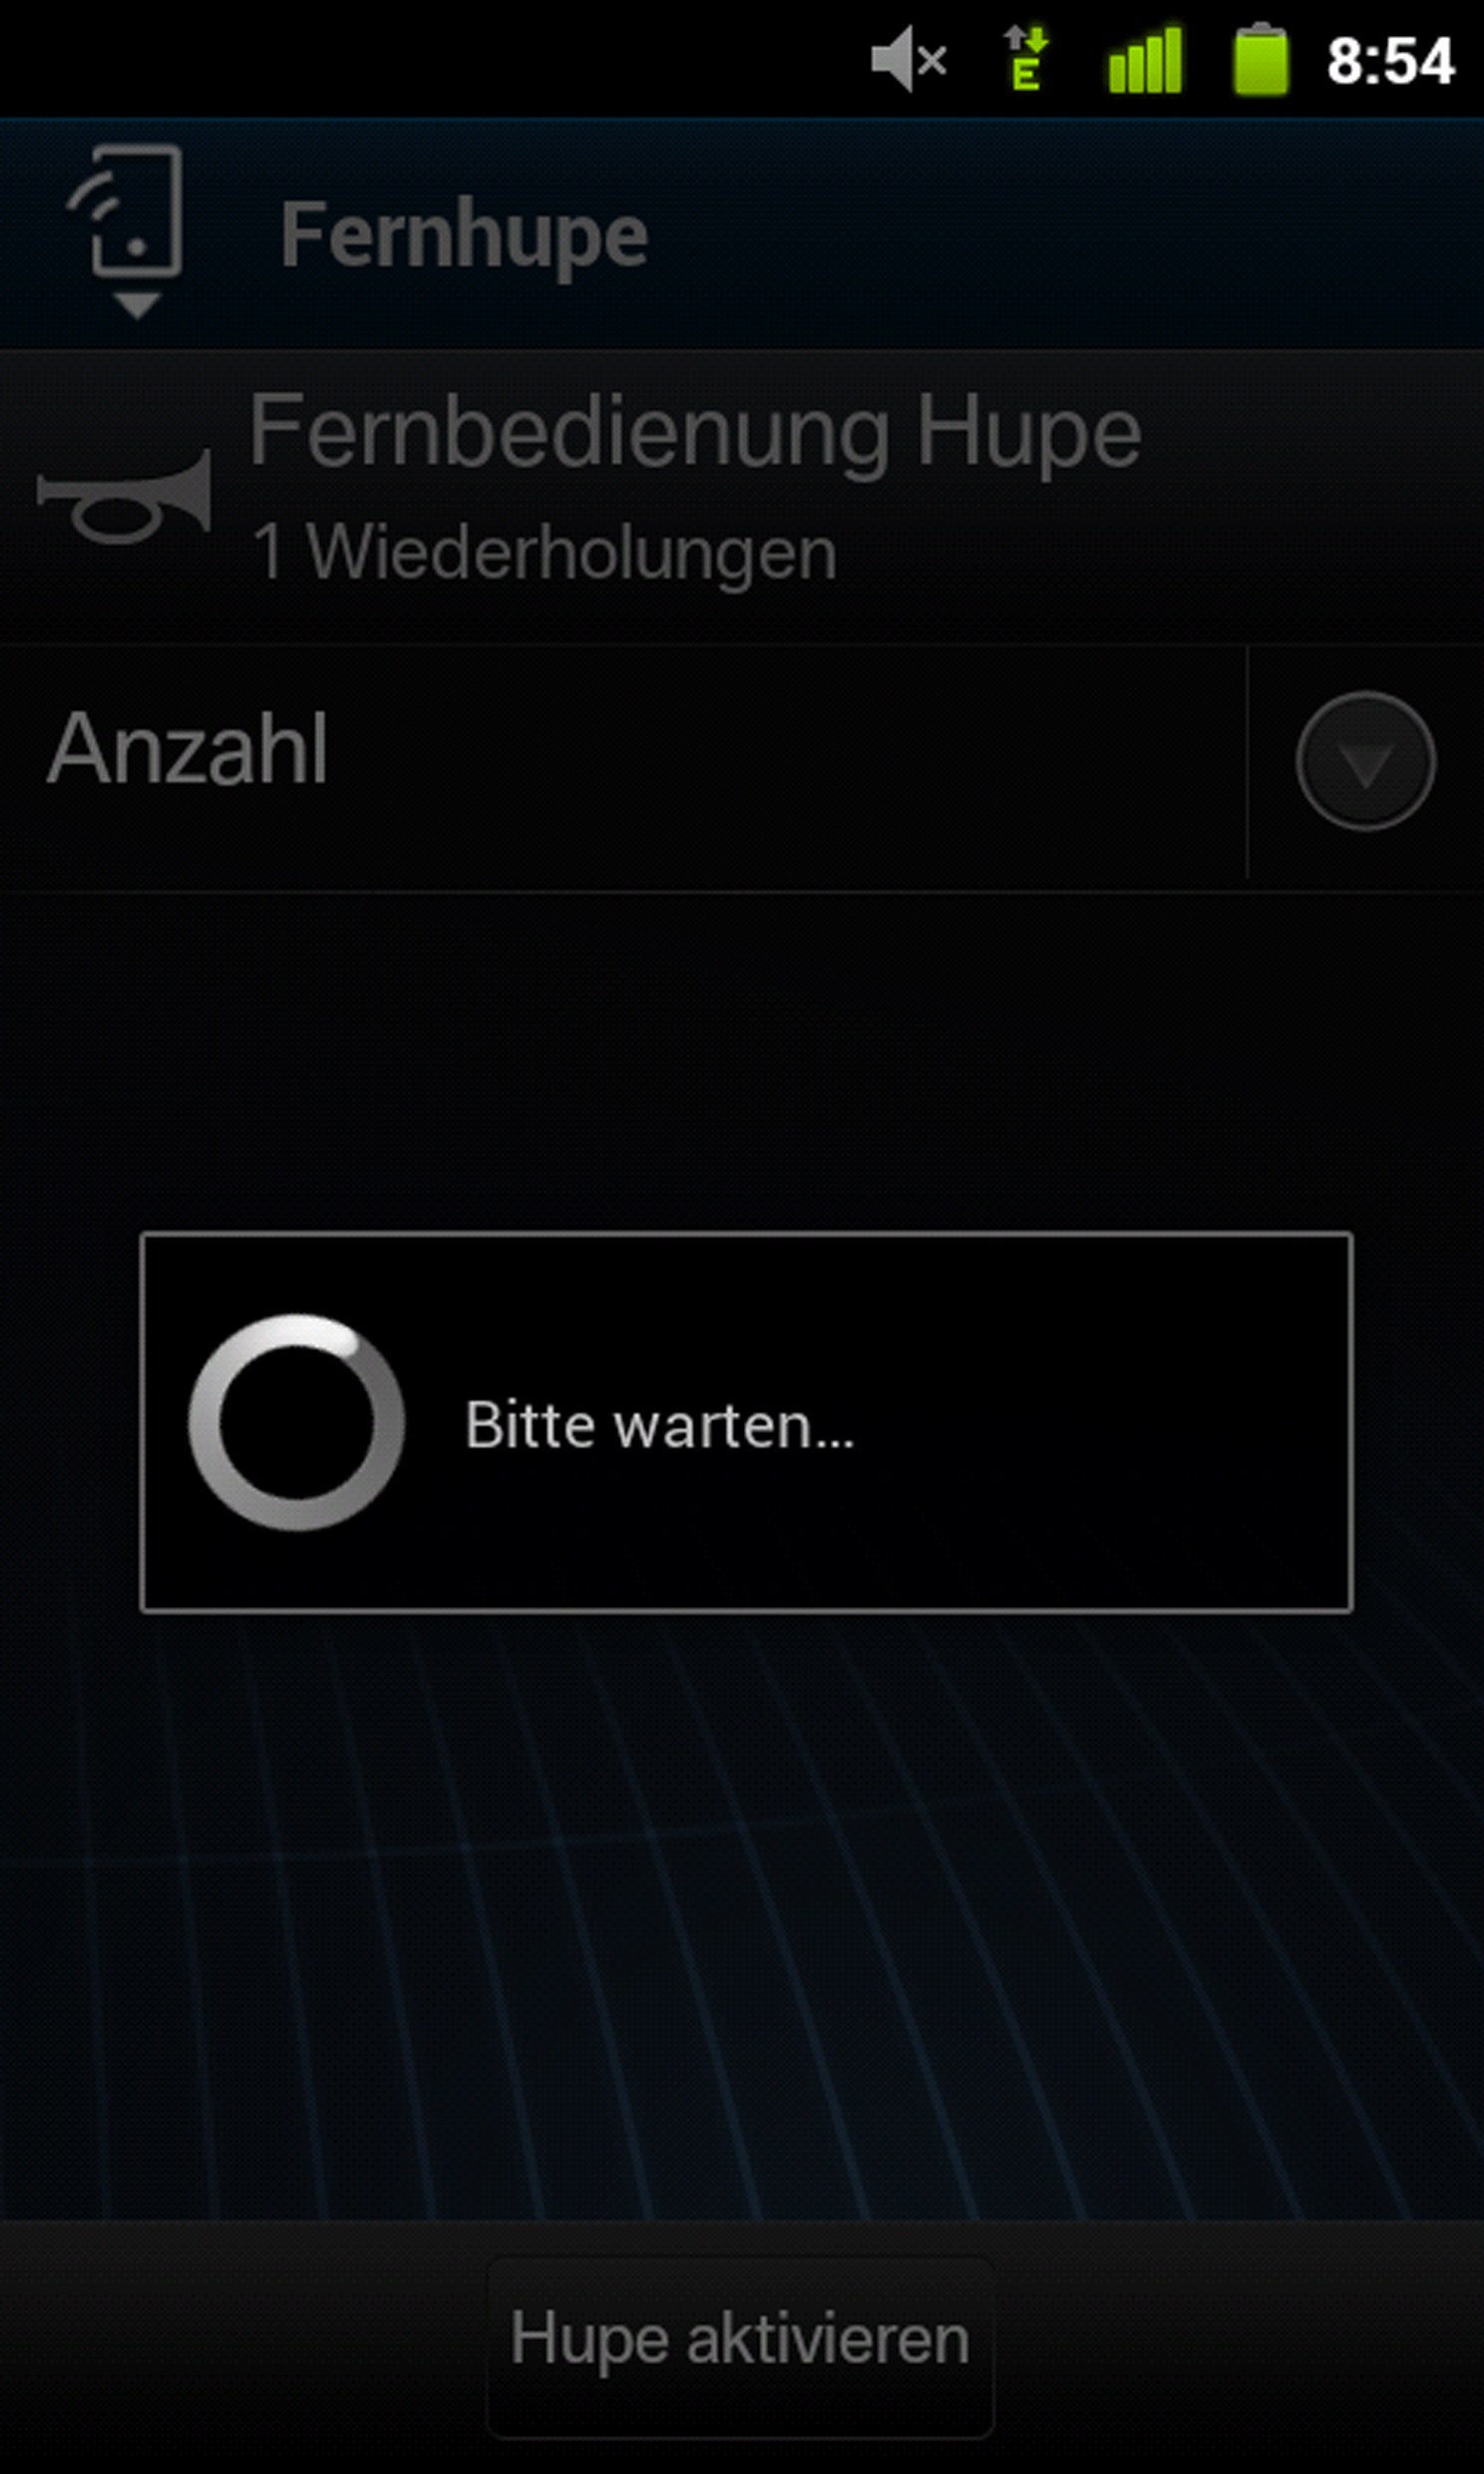 Bmw remote app for android #1